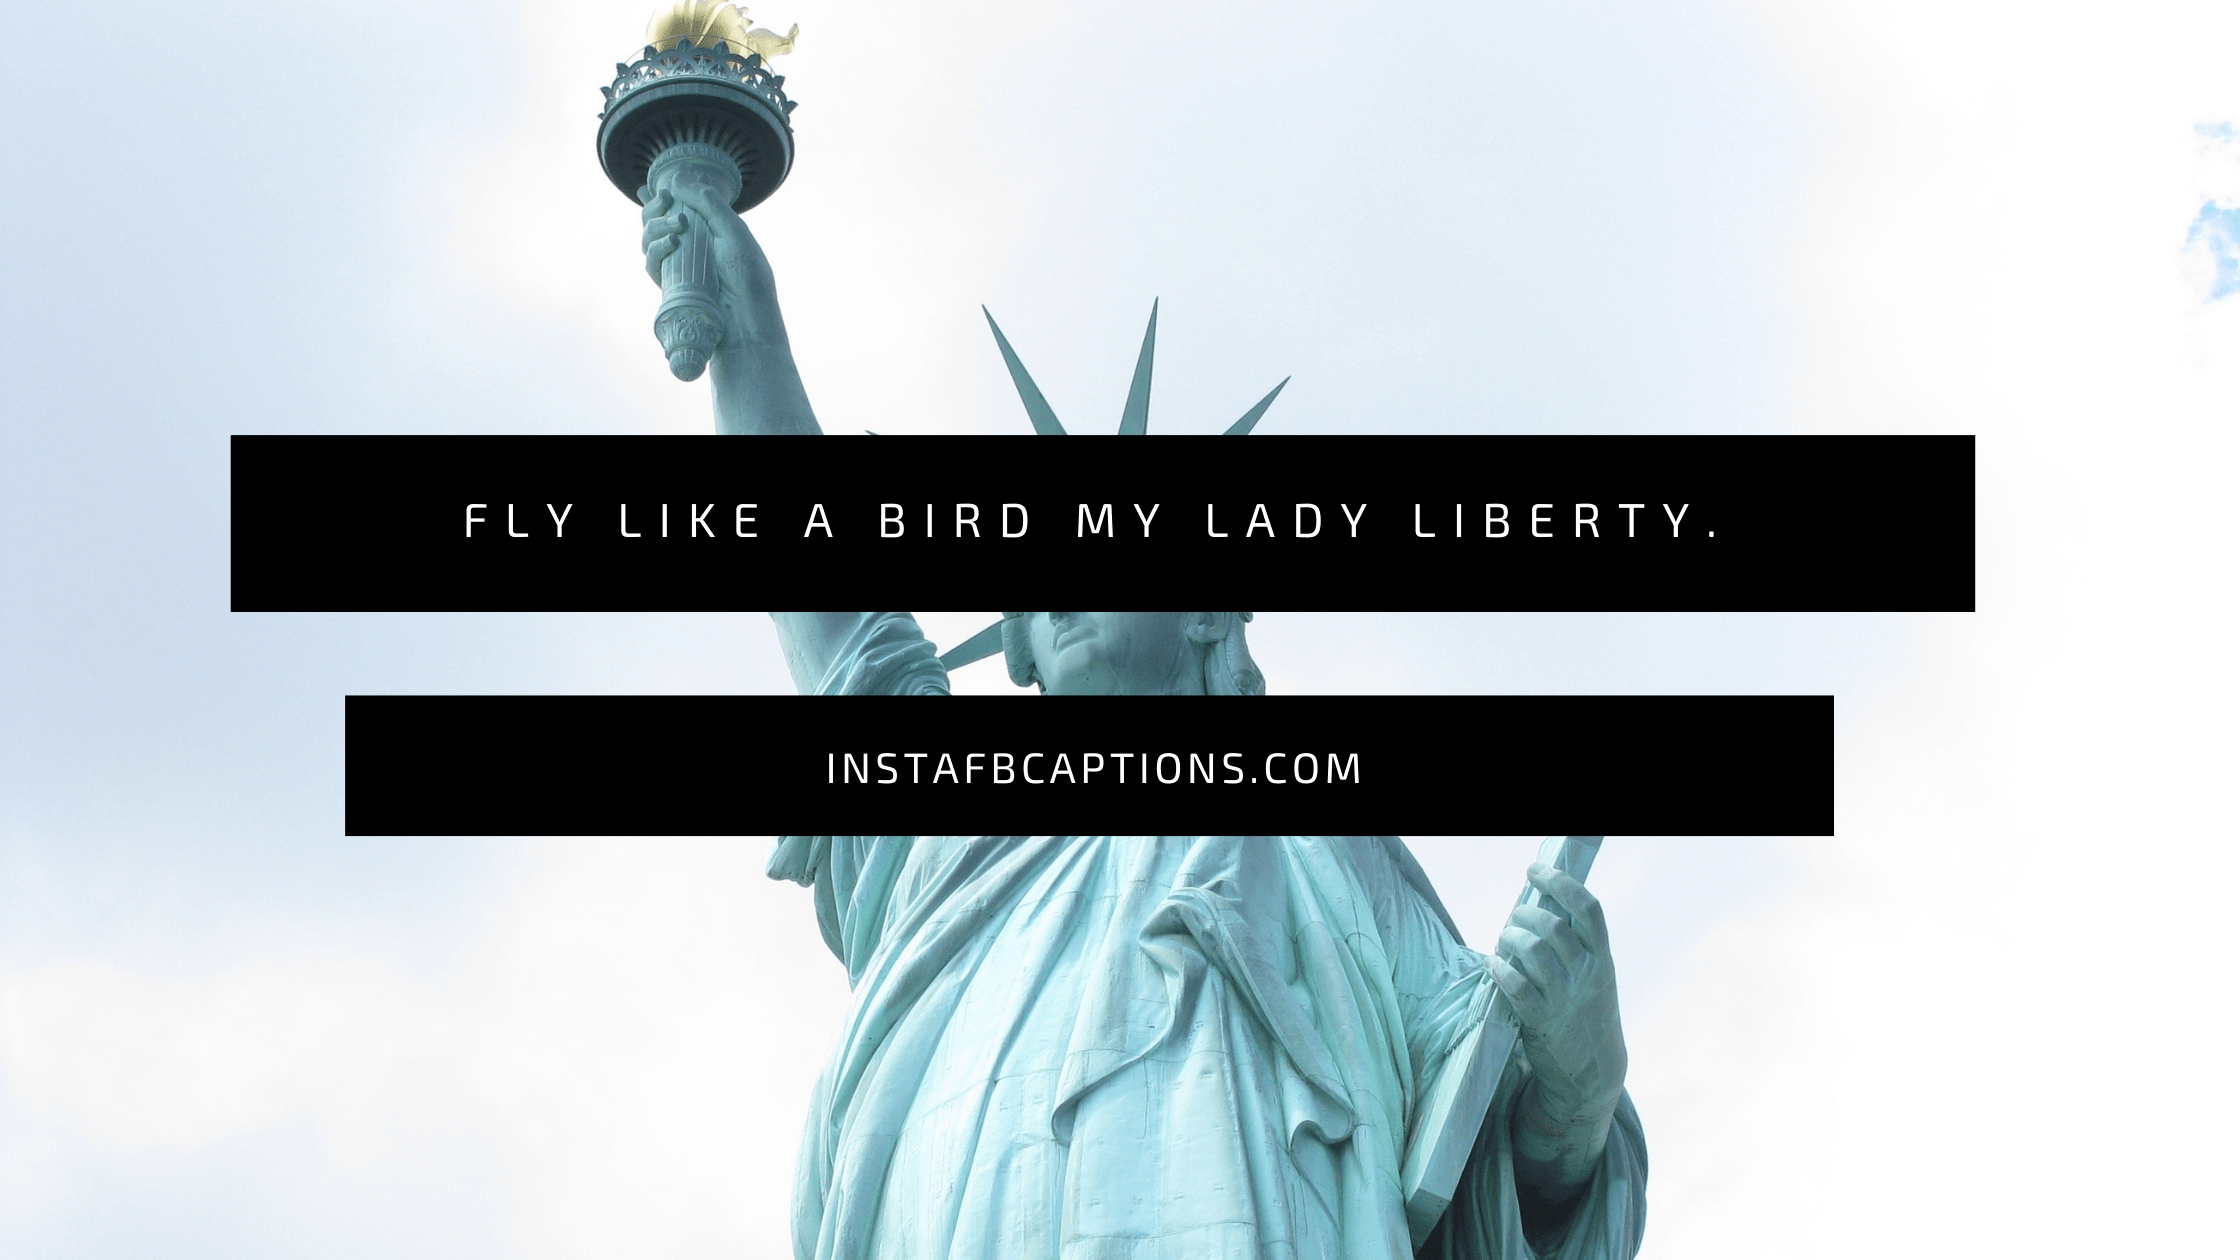 Funny Statue Of Liberty Captions  - Funny Statue of Liberty Captions  - 78 Statue of Liberty Instagram Captions in 2022